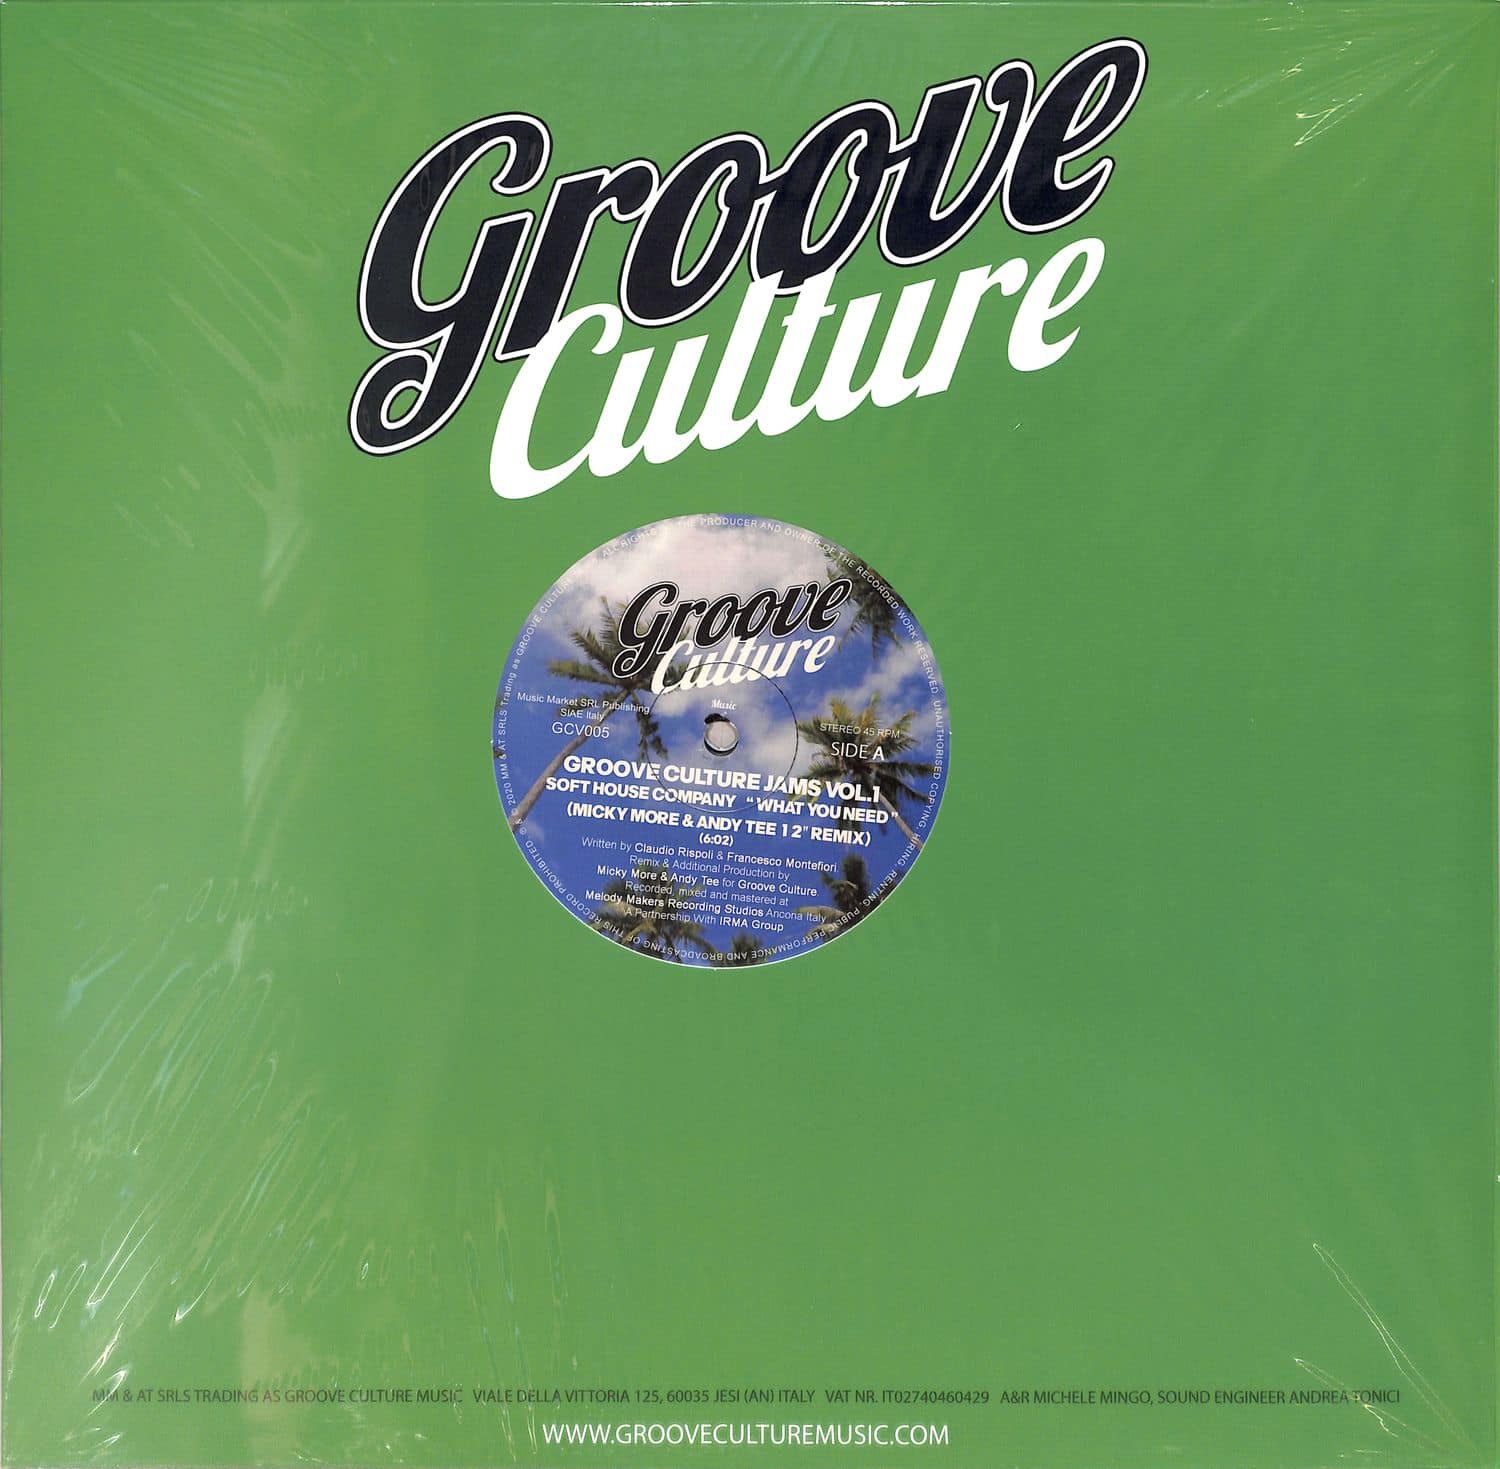 Soft House Company / Micky More & Andy Tee - GROOVE CULTURE JAMS VOL.1